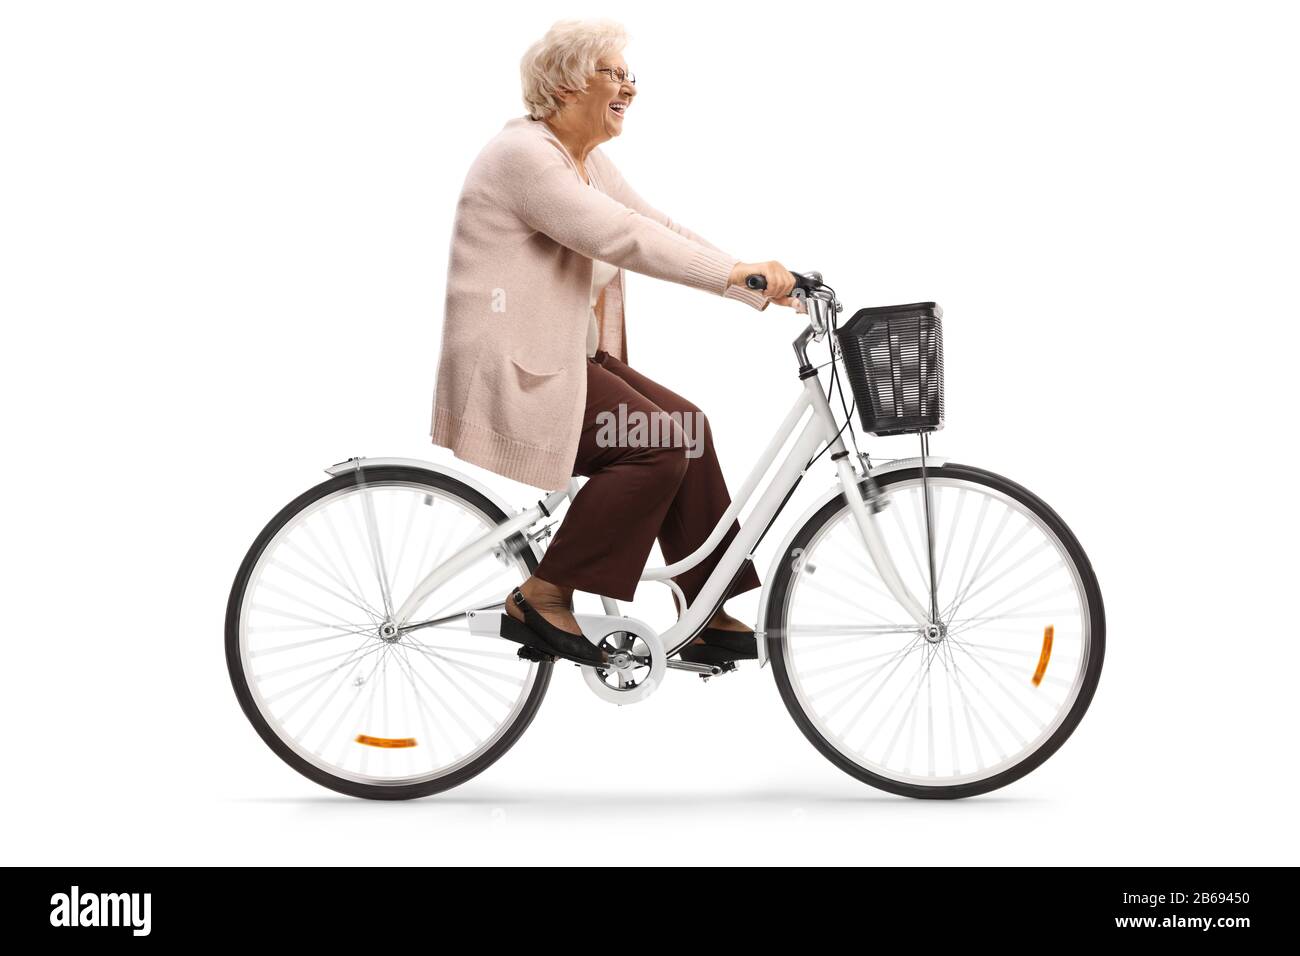 Senior woman riding a bicycle and smiling isolated on white background Stock Photo